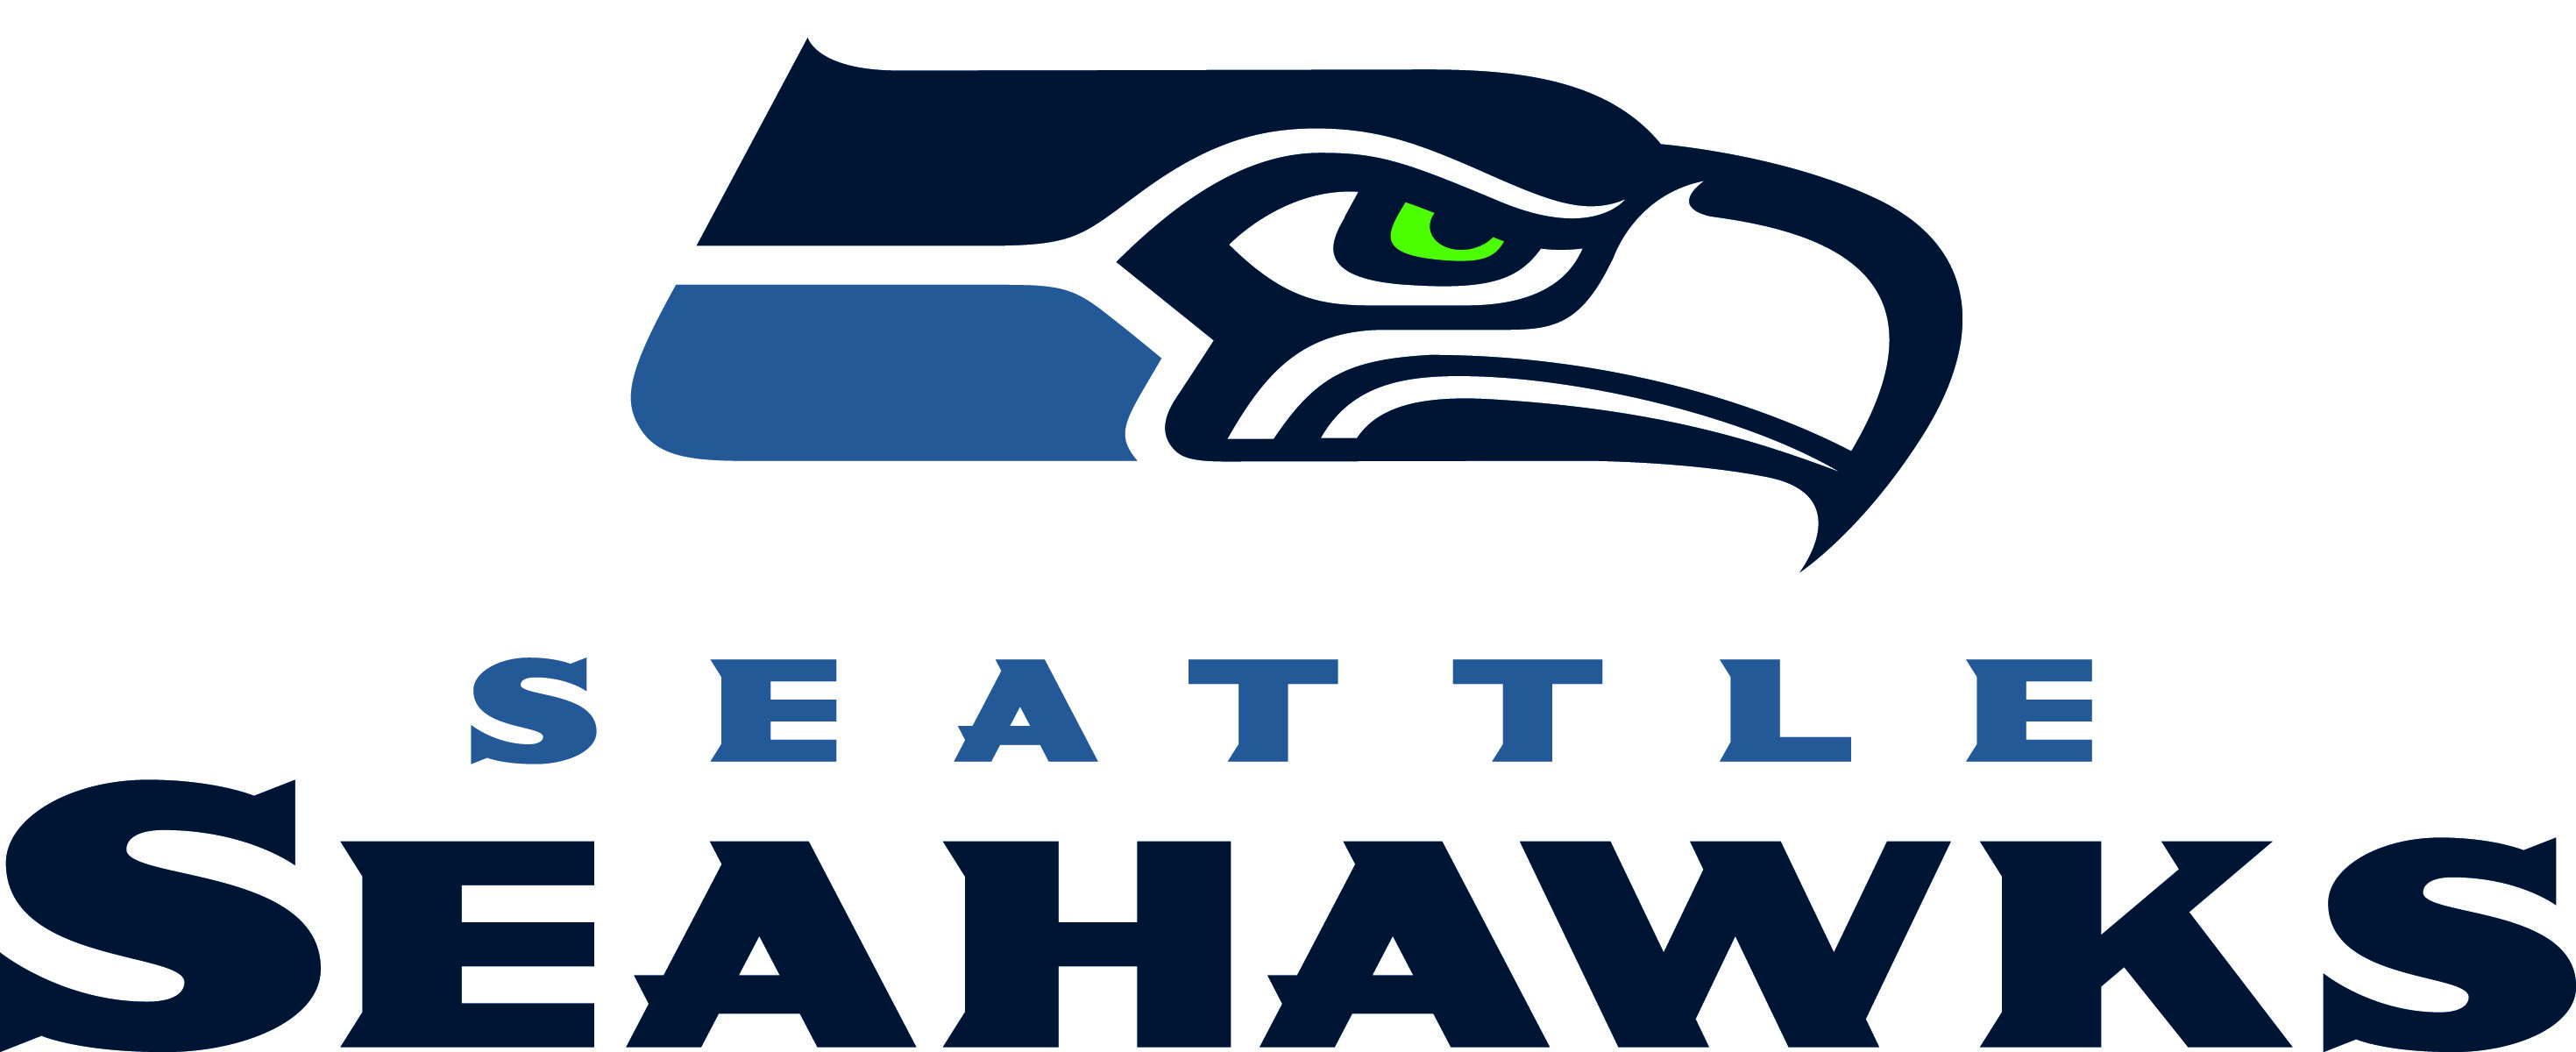 Seattle Seahawks The Legendary Football Team of the Pacific Northwest